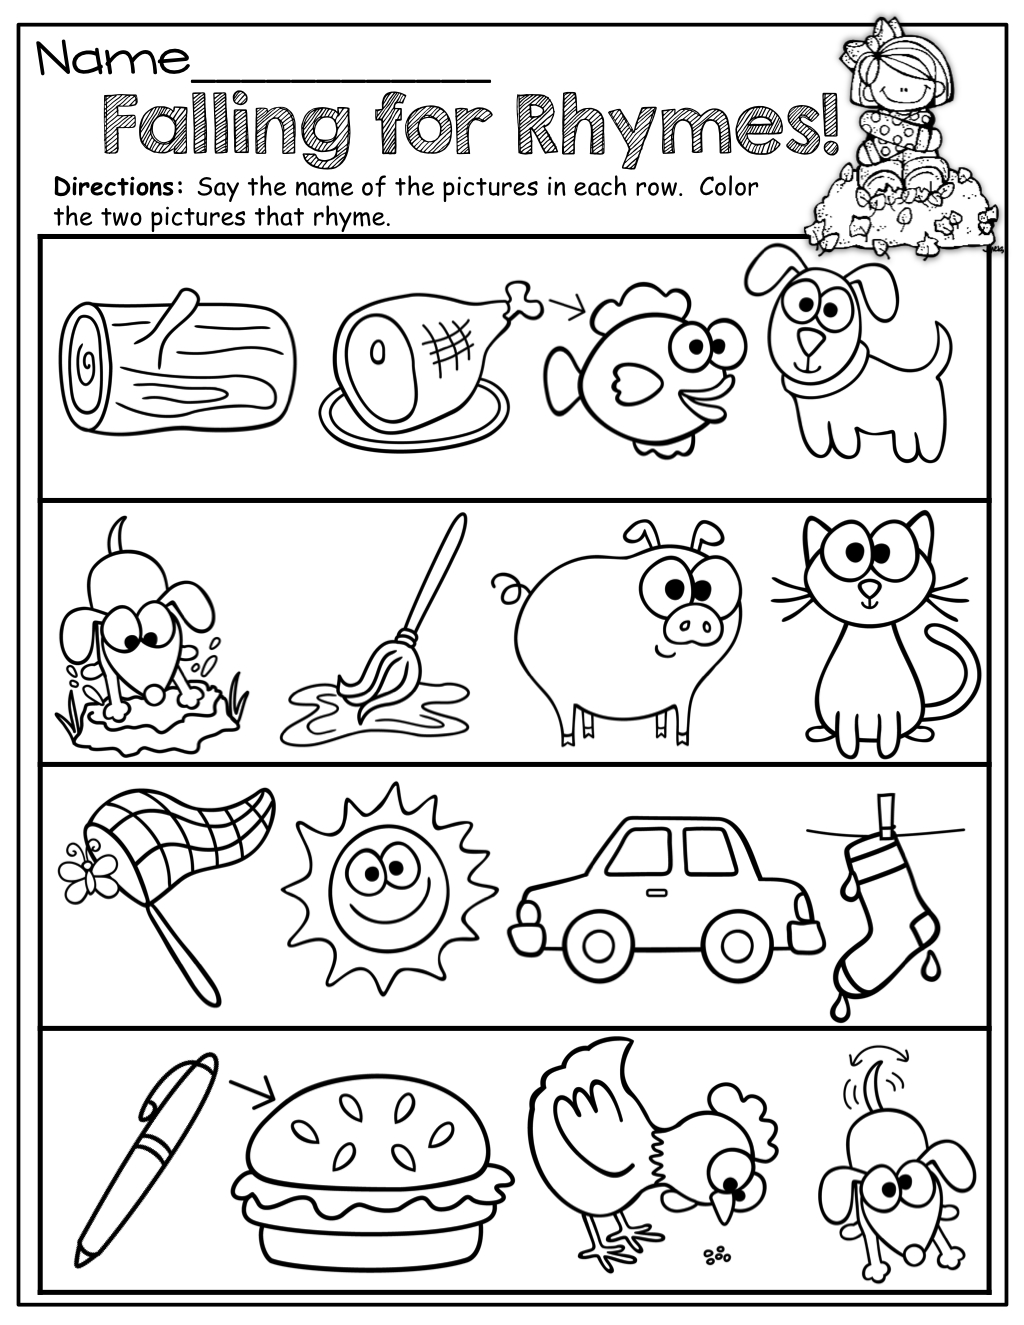 Repinnedmyslpmaterials Visit Our Page For Free Speech - Free Printable Rhyming Activities For Kindergarten